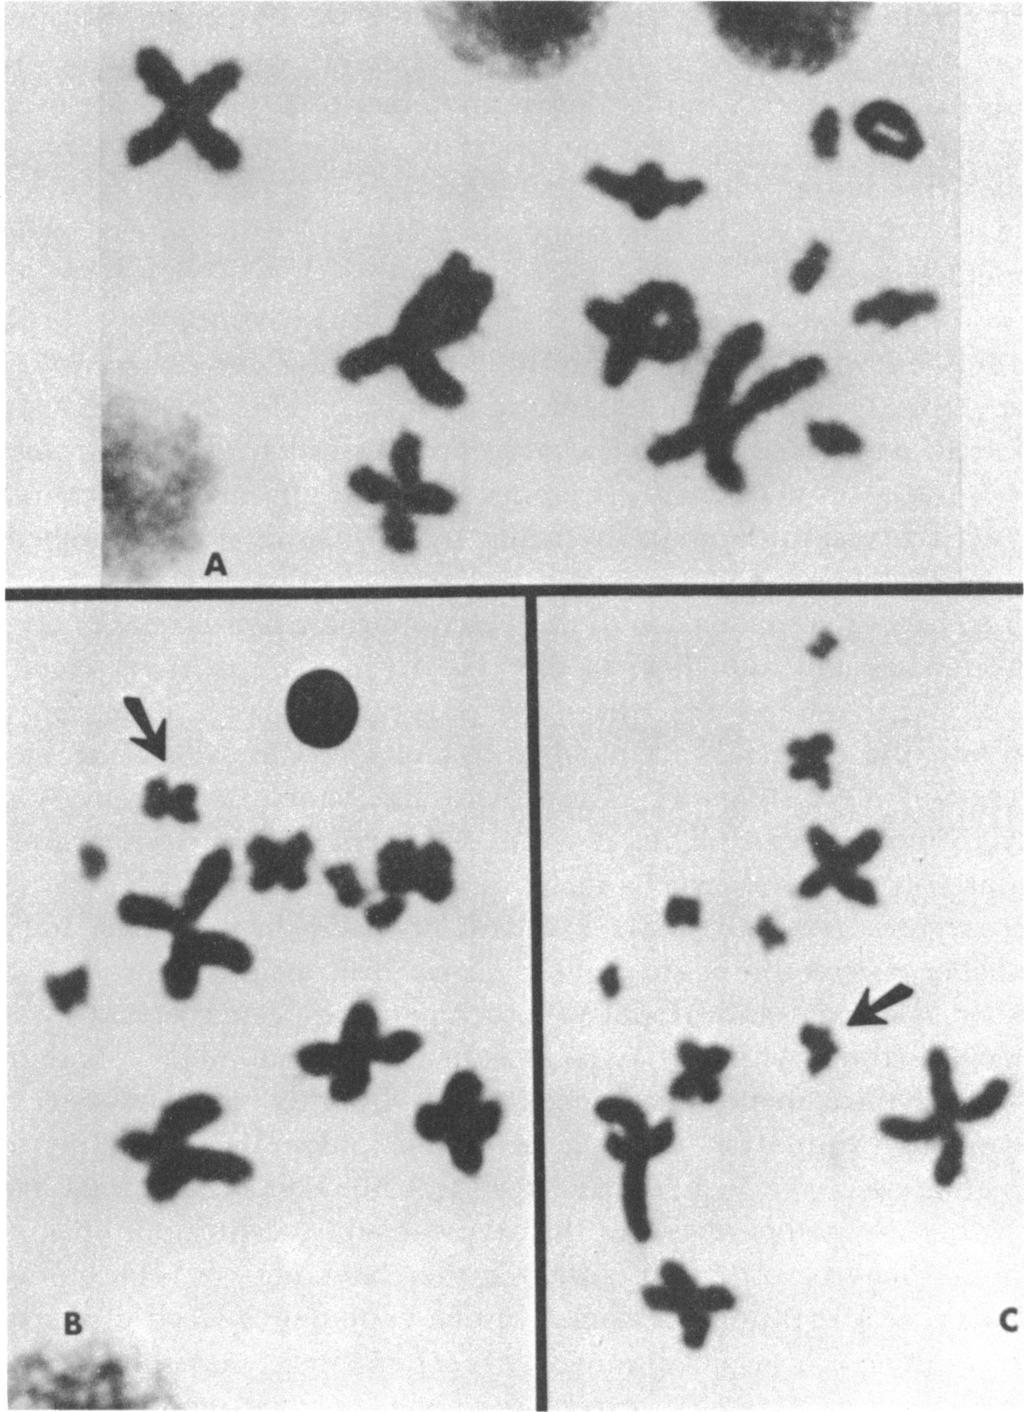 1970 COLE: LIZARD KARYOTYPES 23 Xt... A +~~~~f * m s 4 k B 4s B C FIG. 9. Spermatocytes from individual of Sceloporus olivaceus with atypical heteromorphic pair of chromosomes (no.